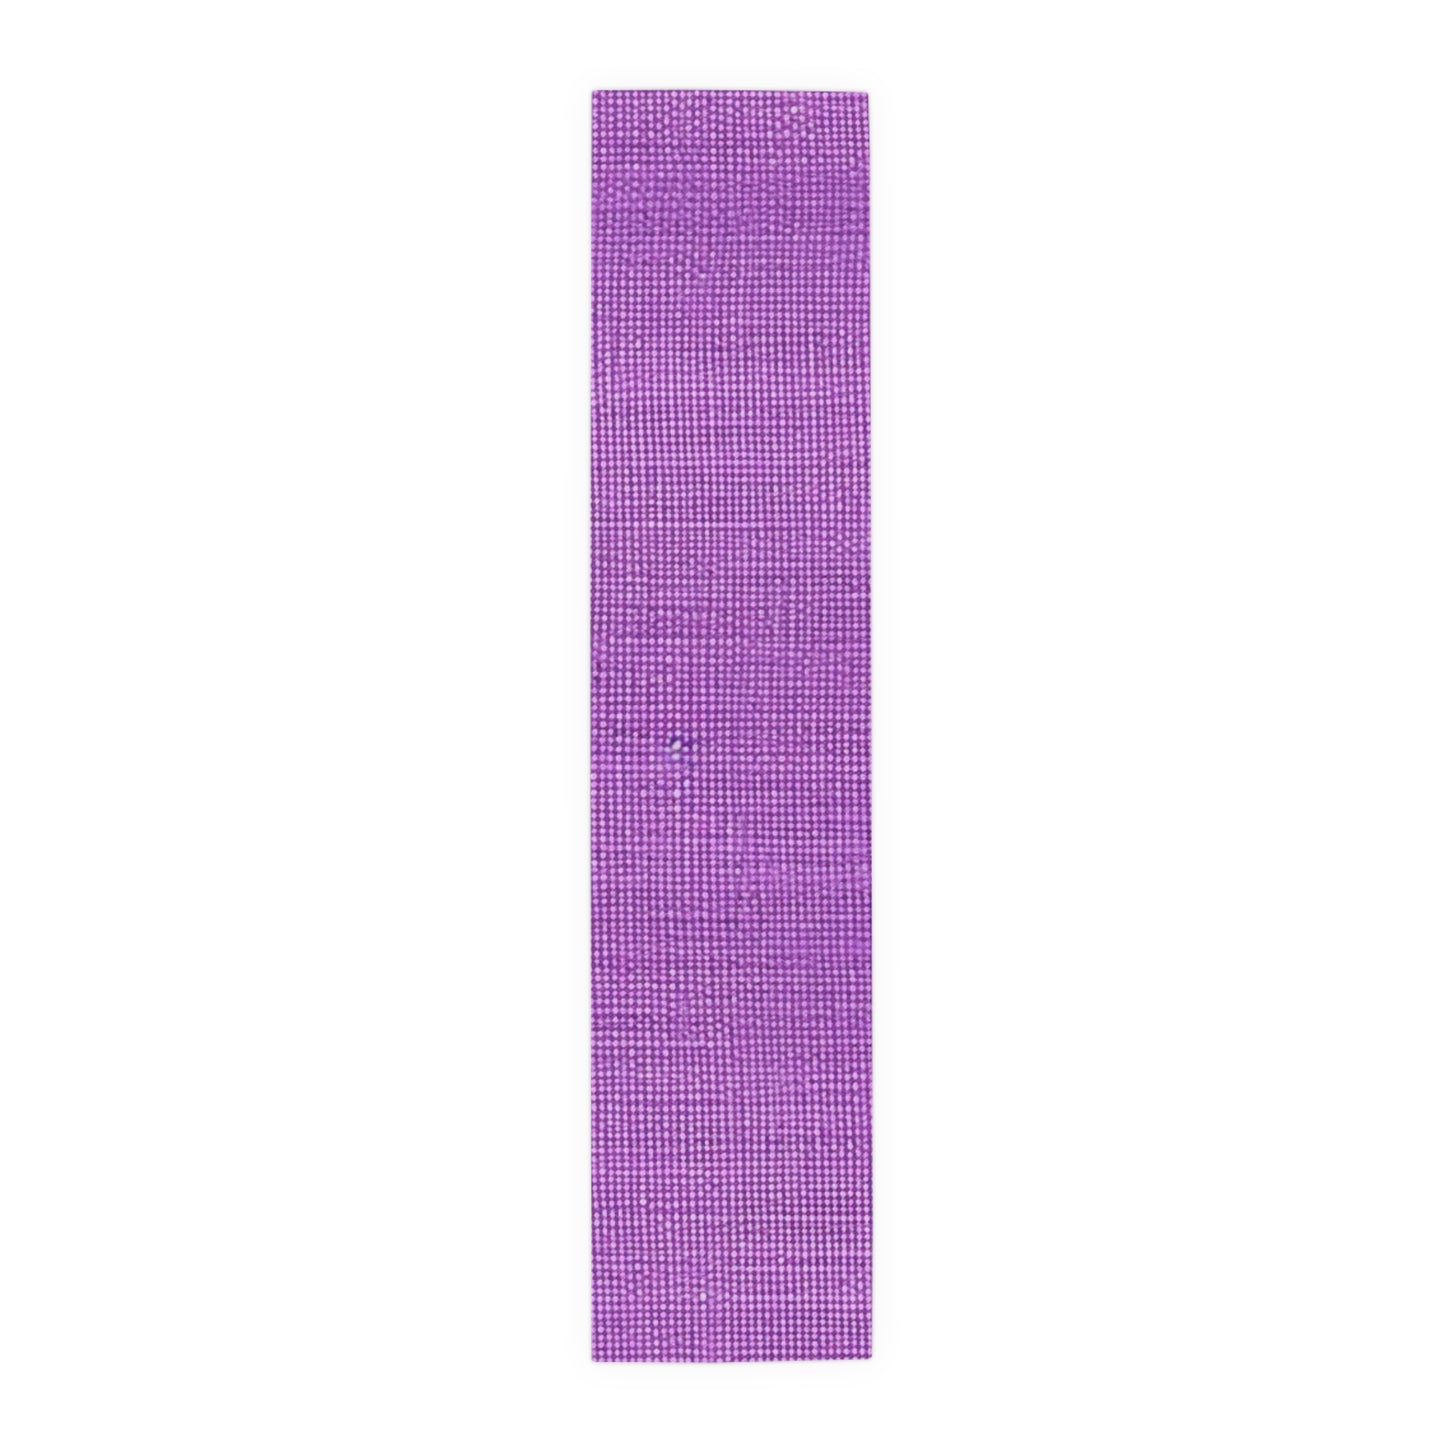 Hyper Iris Orchid Red: Denim-Inspired, Bold Style - Table Runner (Cotton, Poly)